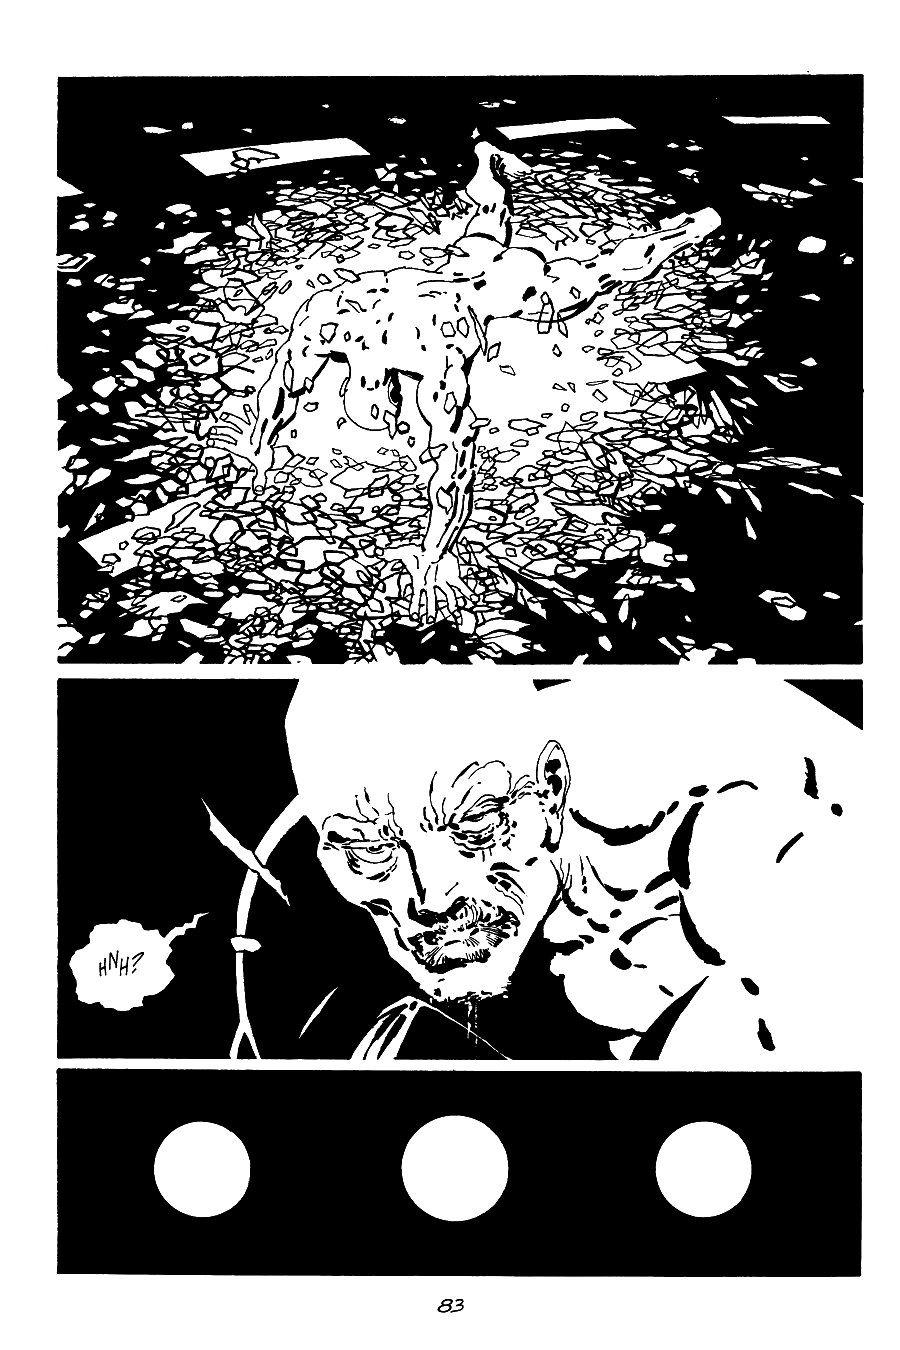 page 83 of sin city 2 the hard goodbye